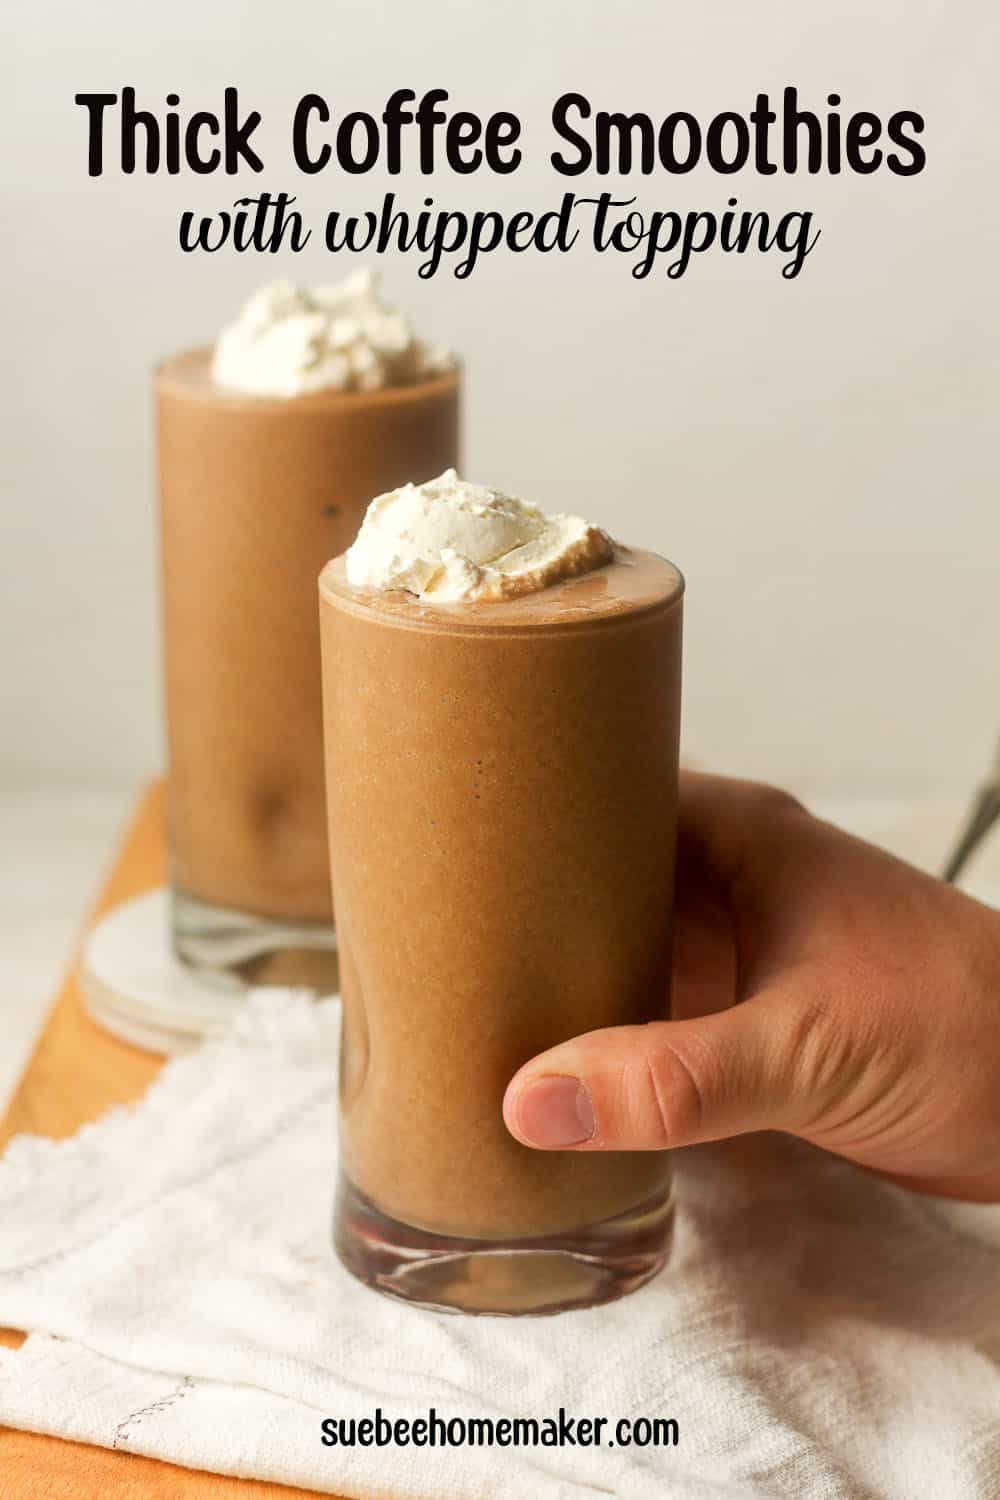 A hand reaching for a thick coffee smoothie with whipped topping.